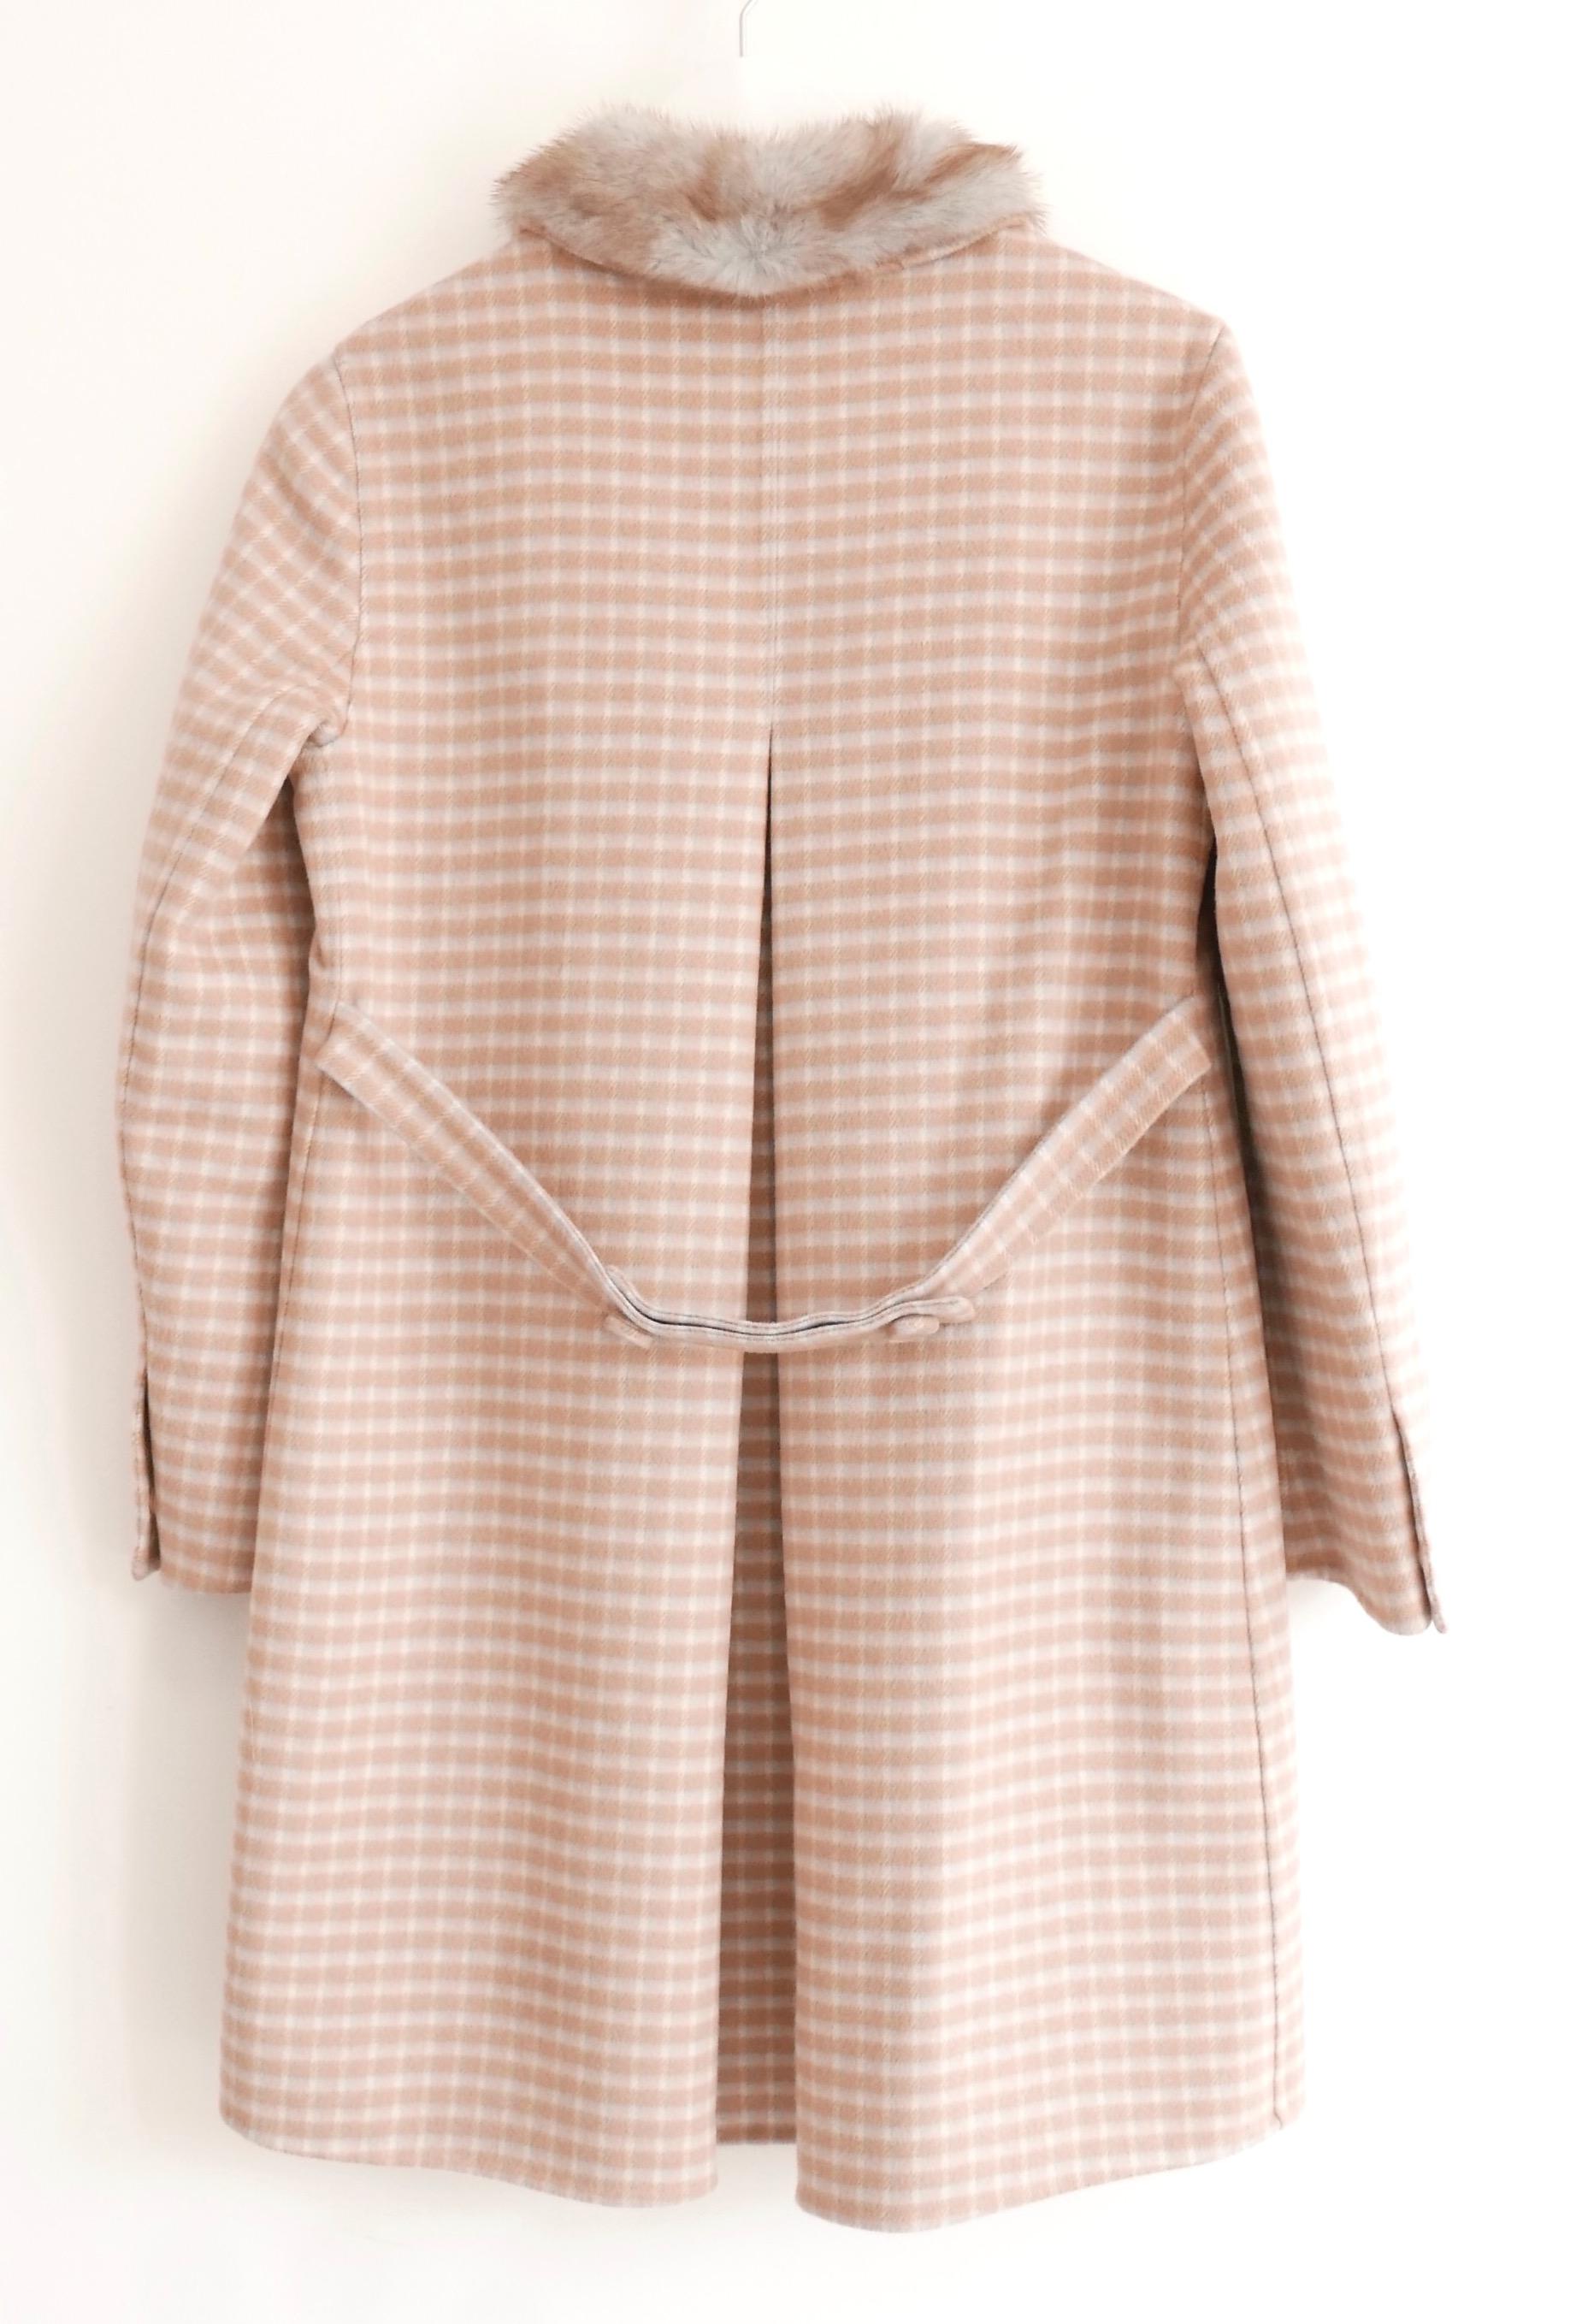 Absolutely divine Prada coat from the Fall 2015 Collection. bought for £4000 and worn once - some with spare button. Made from ultra soft camel, pale blue and white check virgin wool 
with a grey/brown mink fur collar. Has a gorgeously feminine,